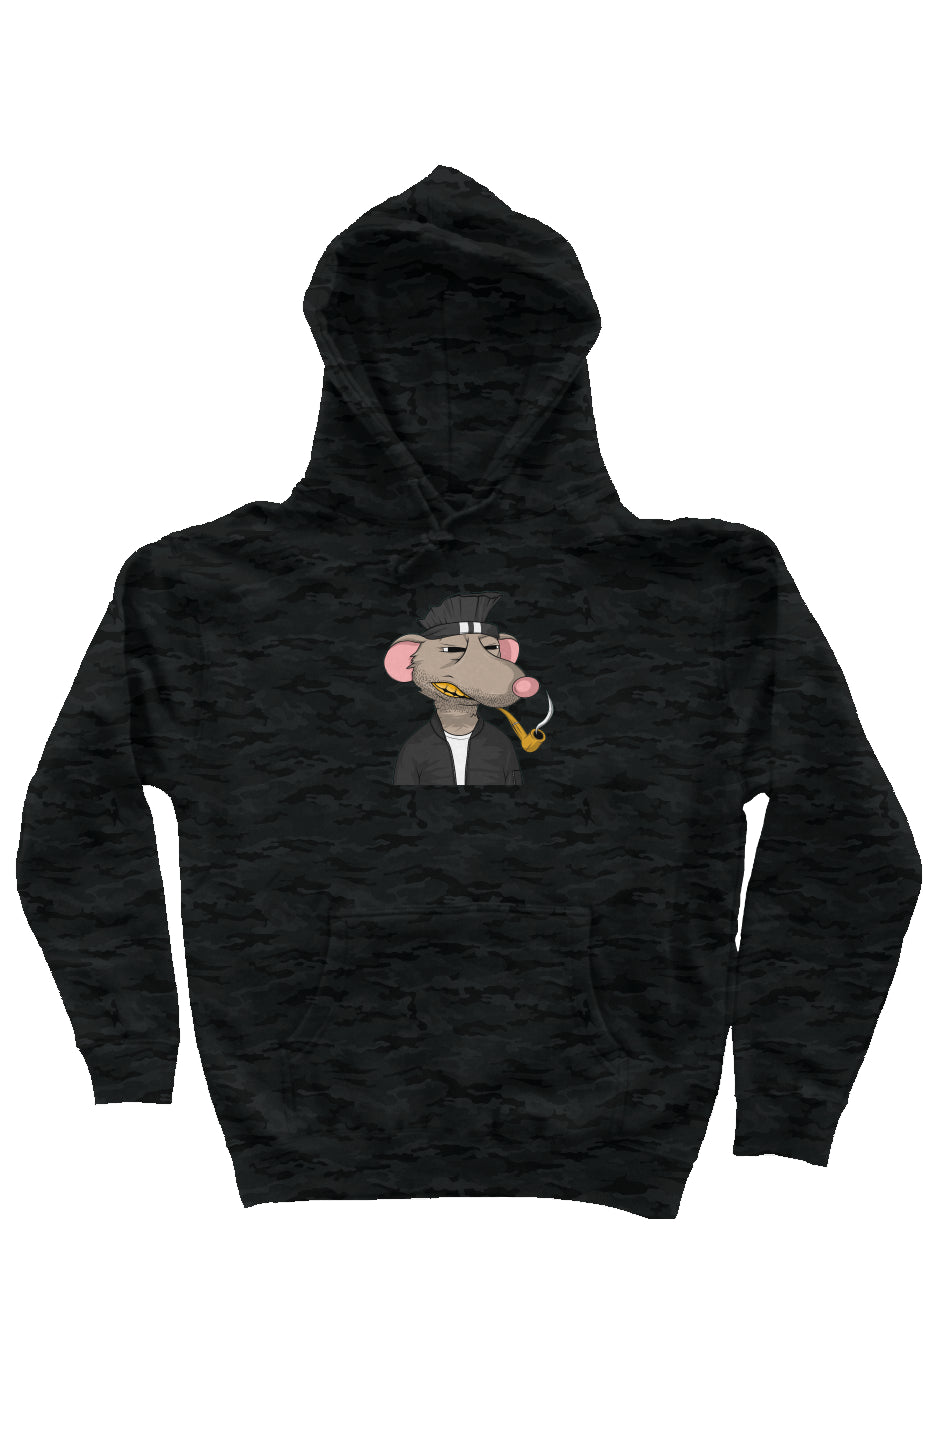 Camo Independent Heavyweight Hoodie feat Fat Rat #3320